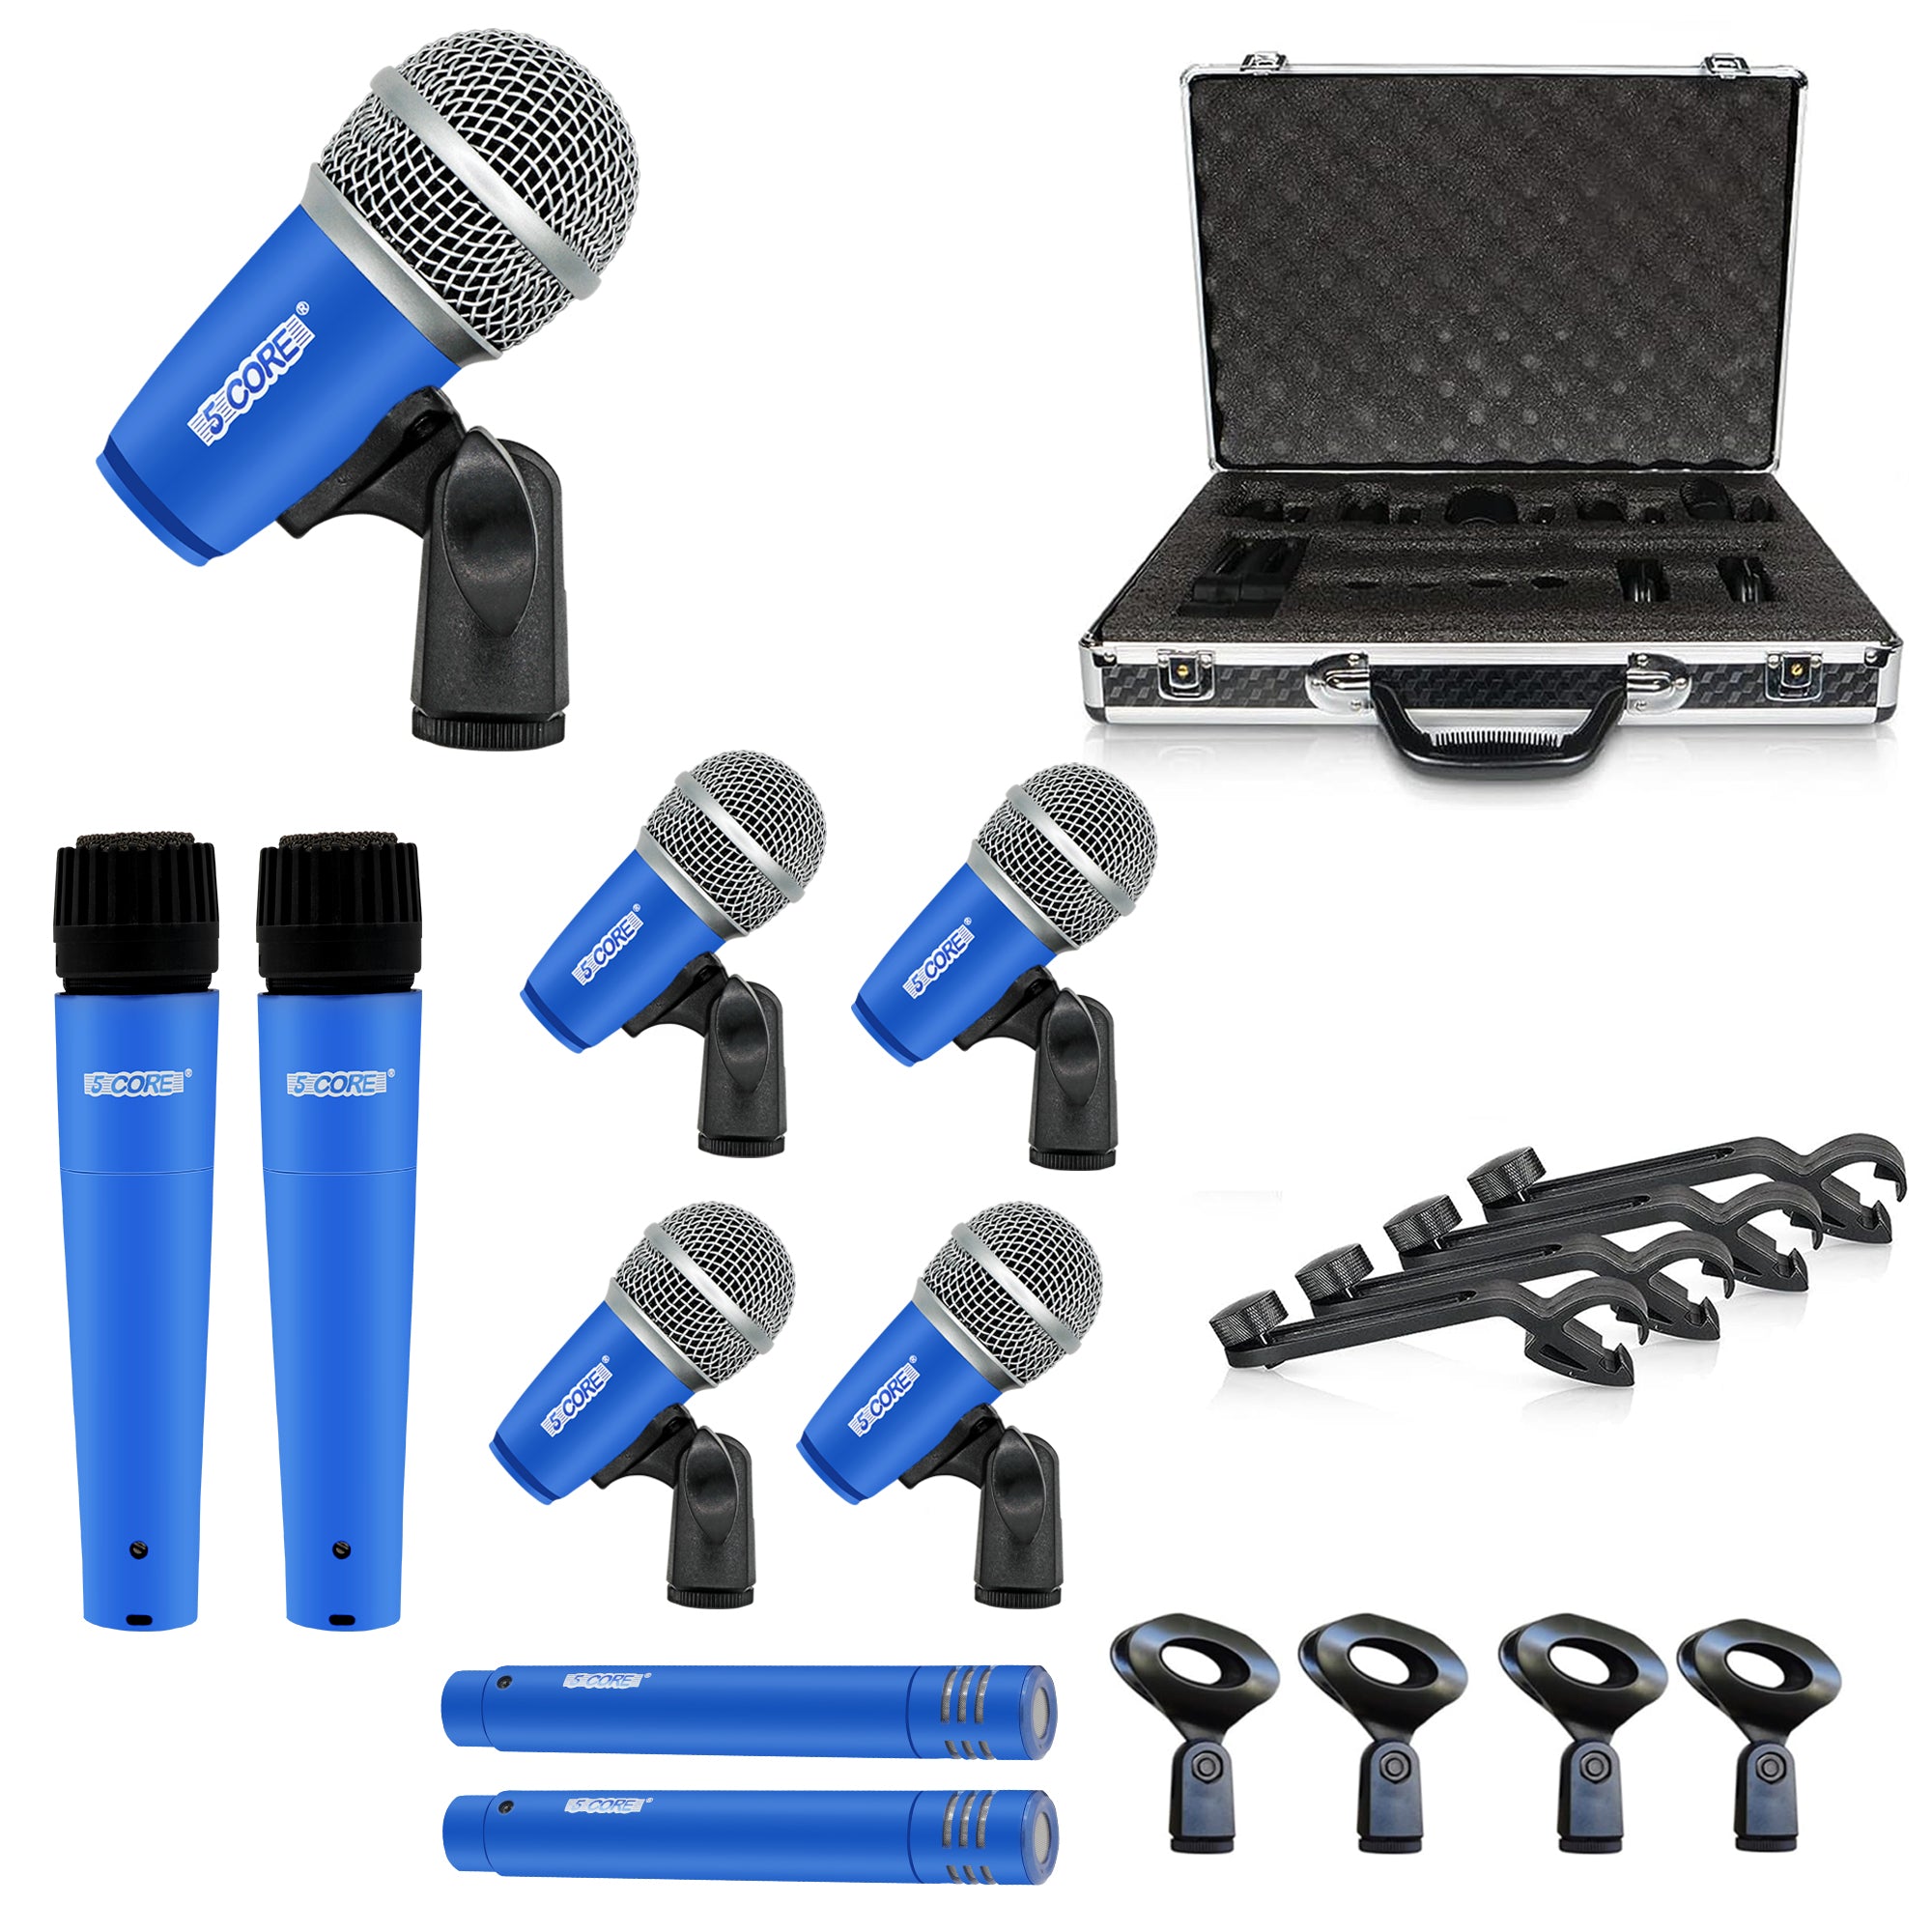 5 Core Drum Microphone Kit 9 Piece Wired Full Metal Dynamic Wired drums Mic Set for Drummers w/ Kick Bass Tom Snare + Silver Carrying Case Sponge & Thread Holder for Vocal & Other Instrument - DM 9RND BLU